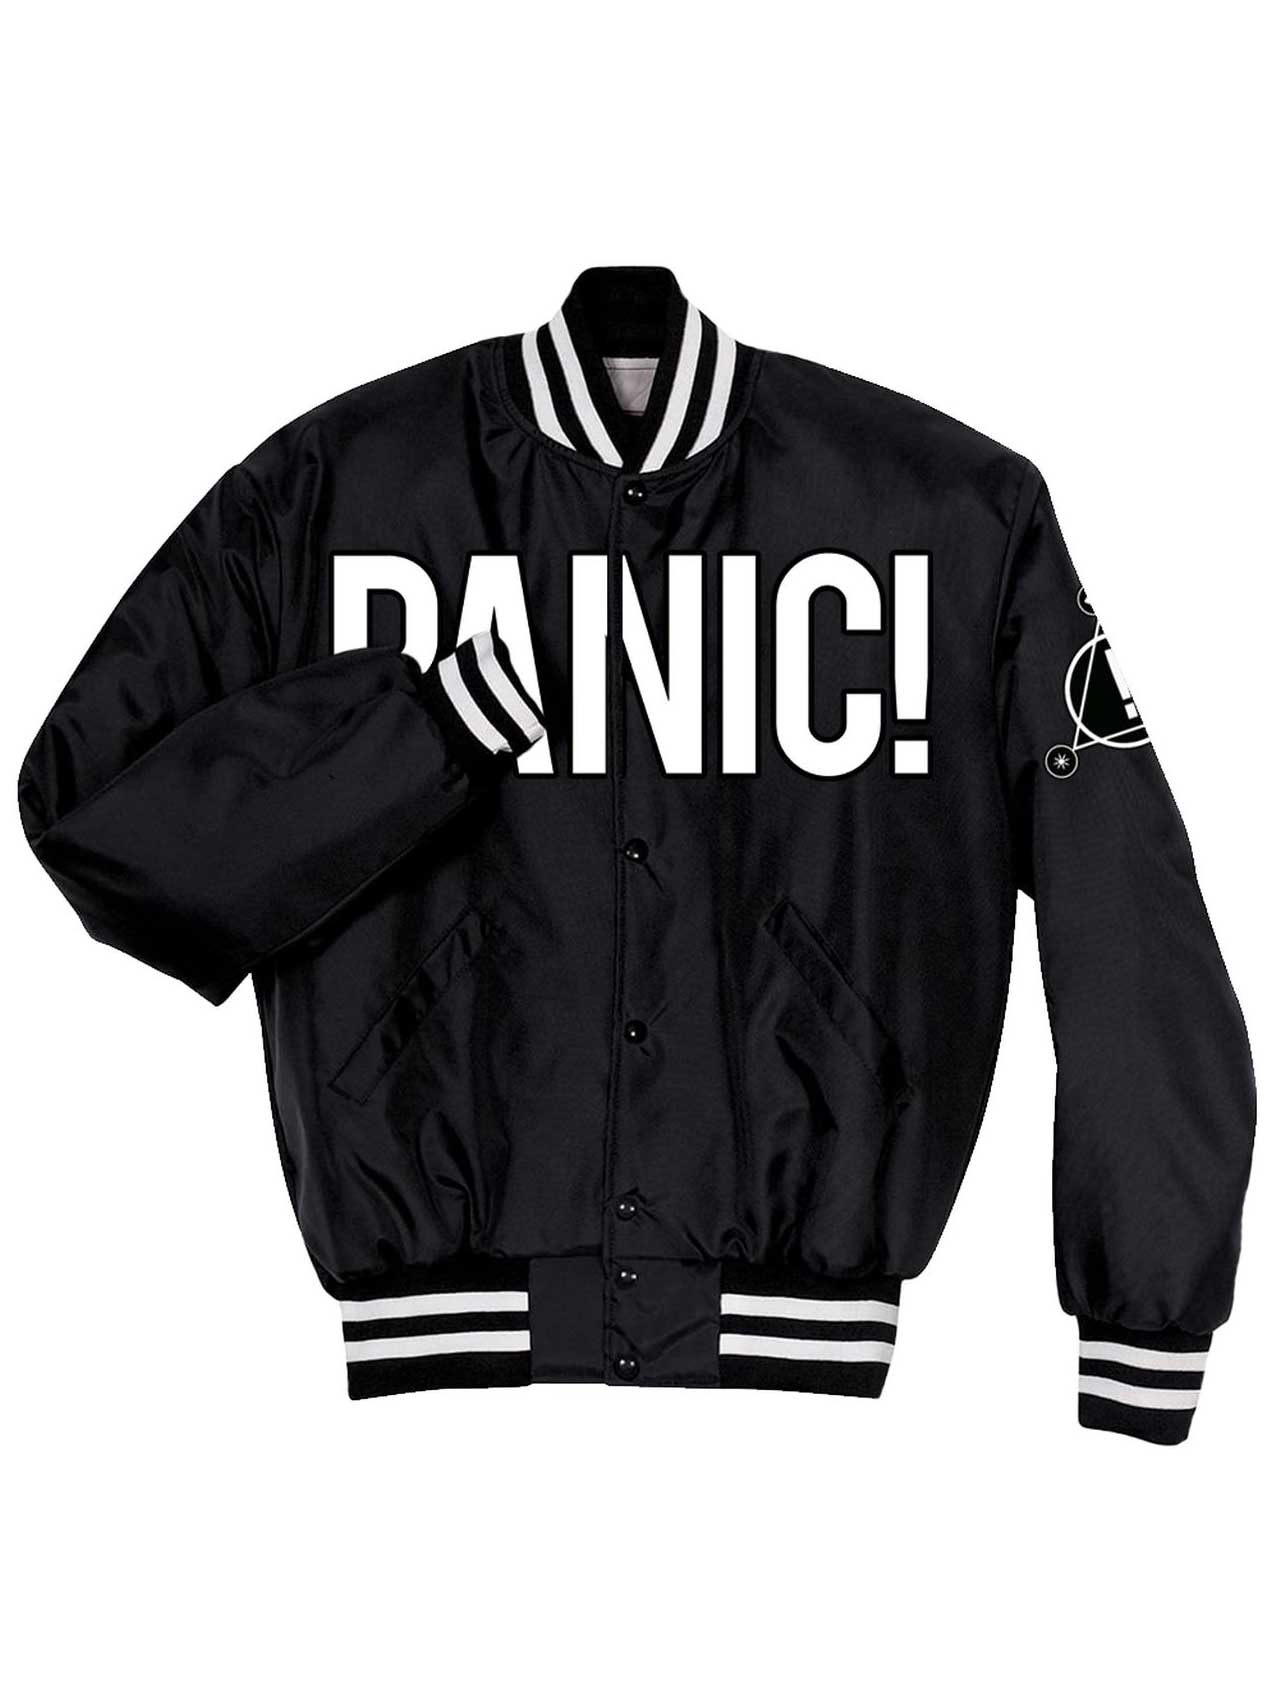 Panic at the Disco letterman jacket